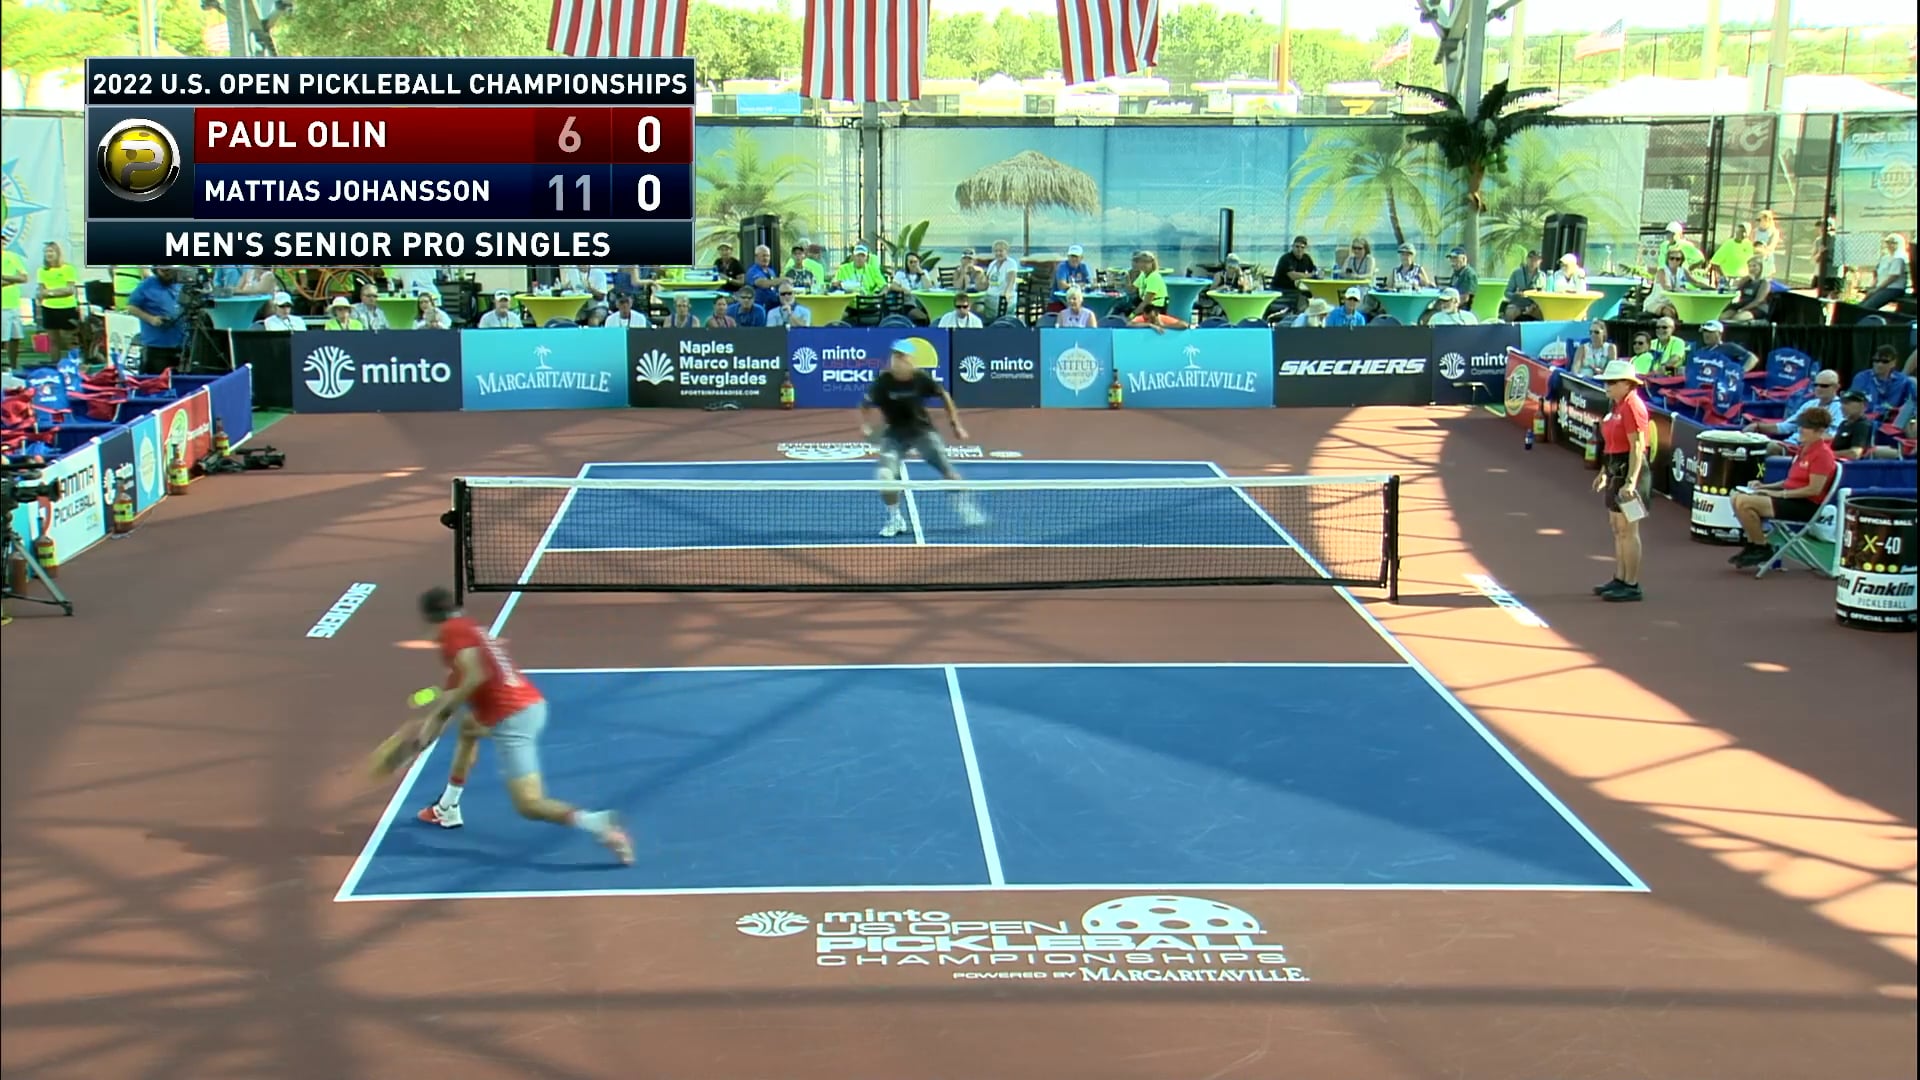 Day 1 Global Live Stream of 2022 US Open Pickleball Championships Day 1 PRO Singles on Vimeo